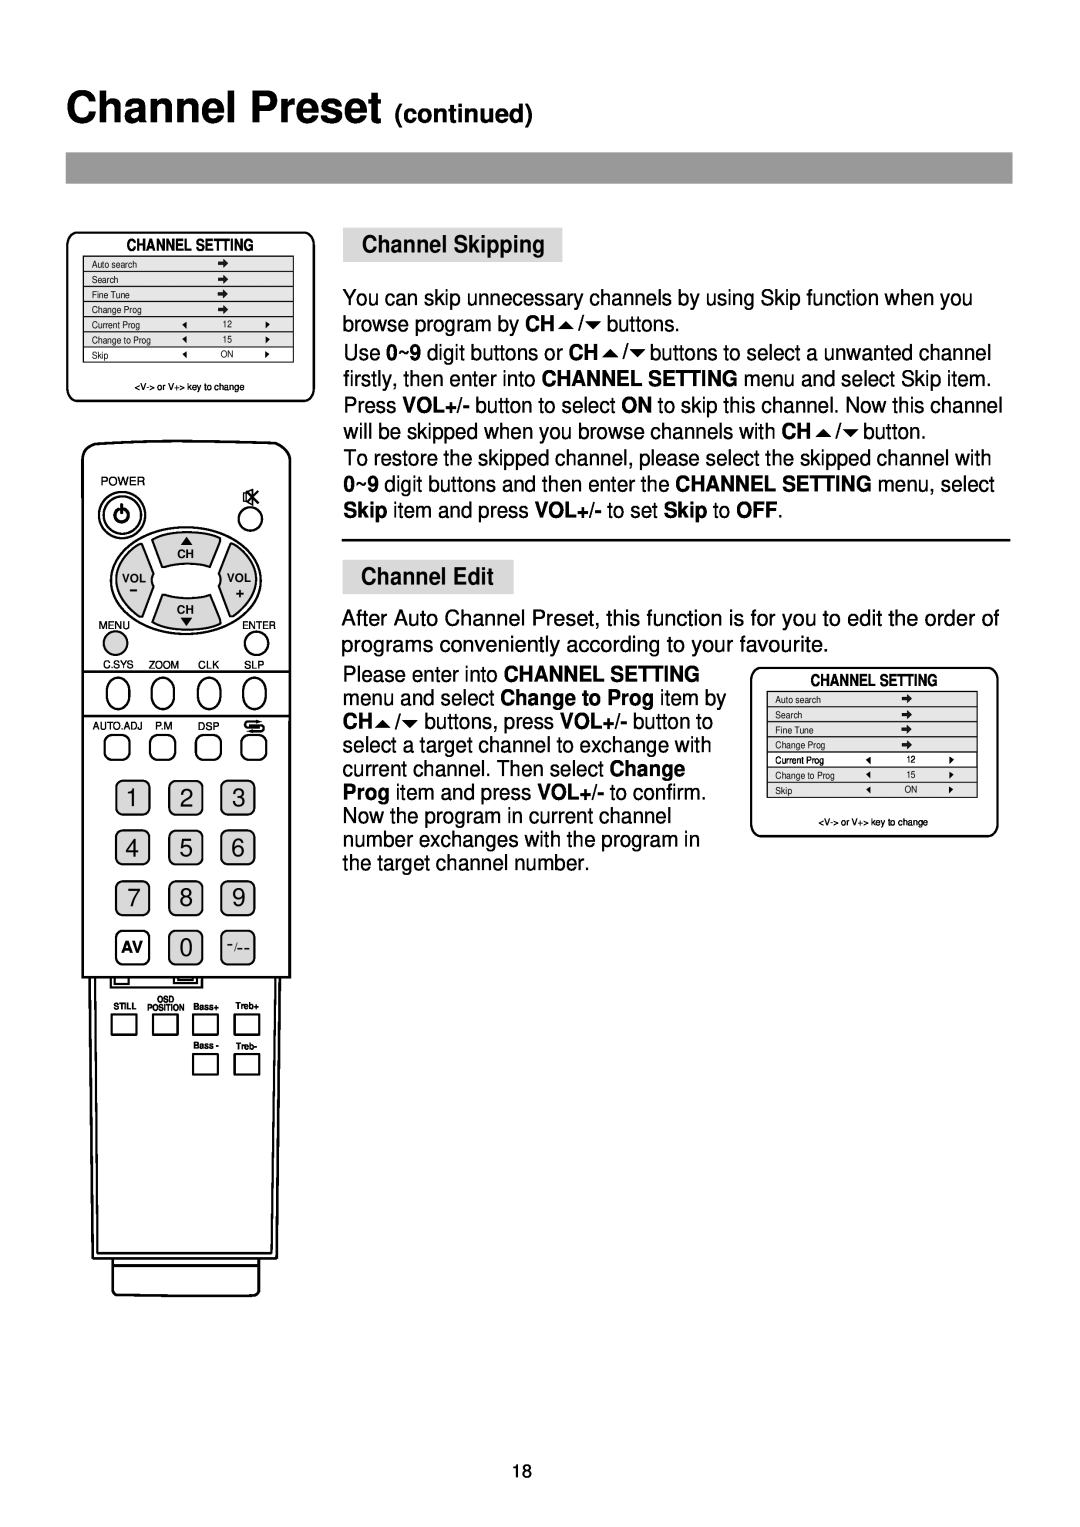 Palsonic TFTV-760 owner manual Channel Preset continued, Channel Skipping, Channel Edit, 1 2 4 